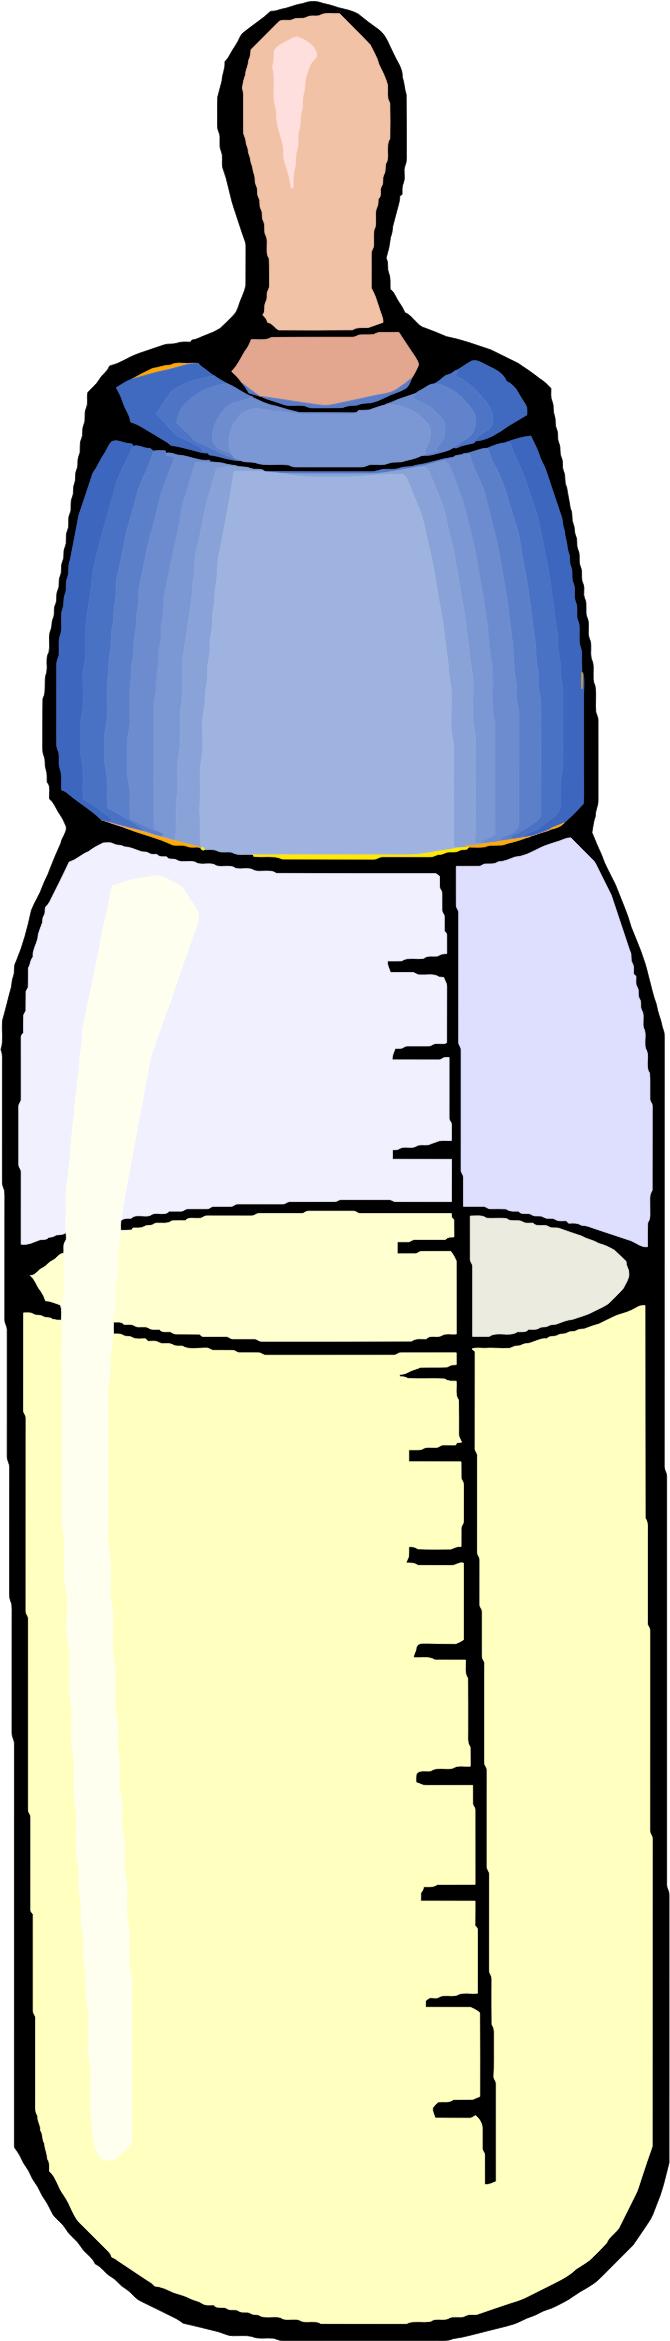 Boys Baby Bottle png